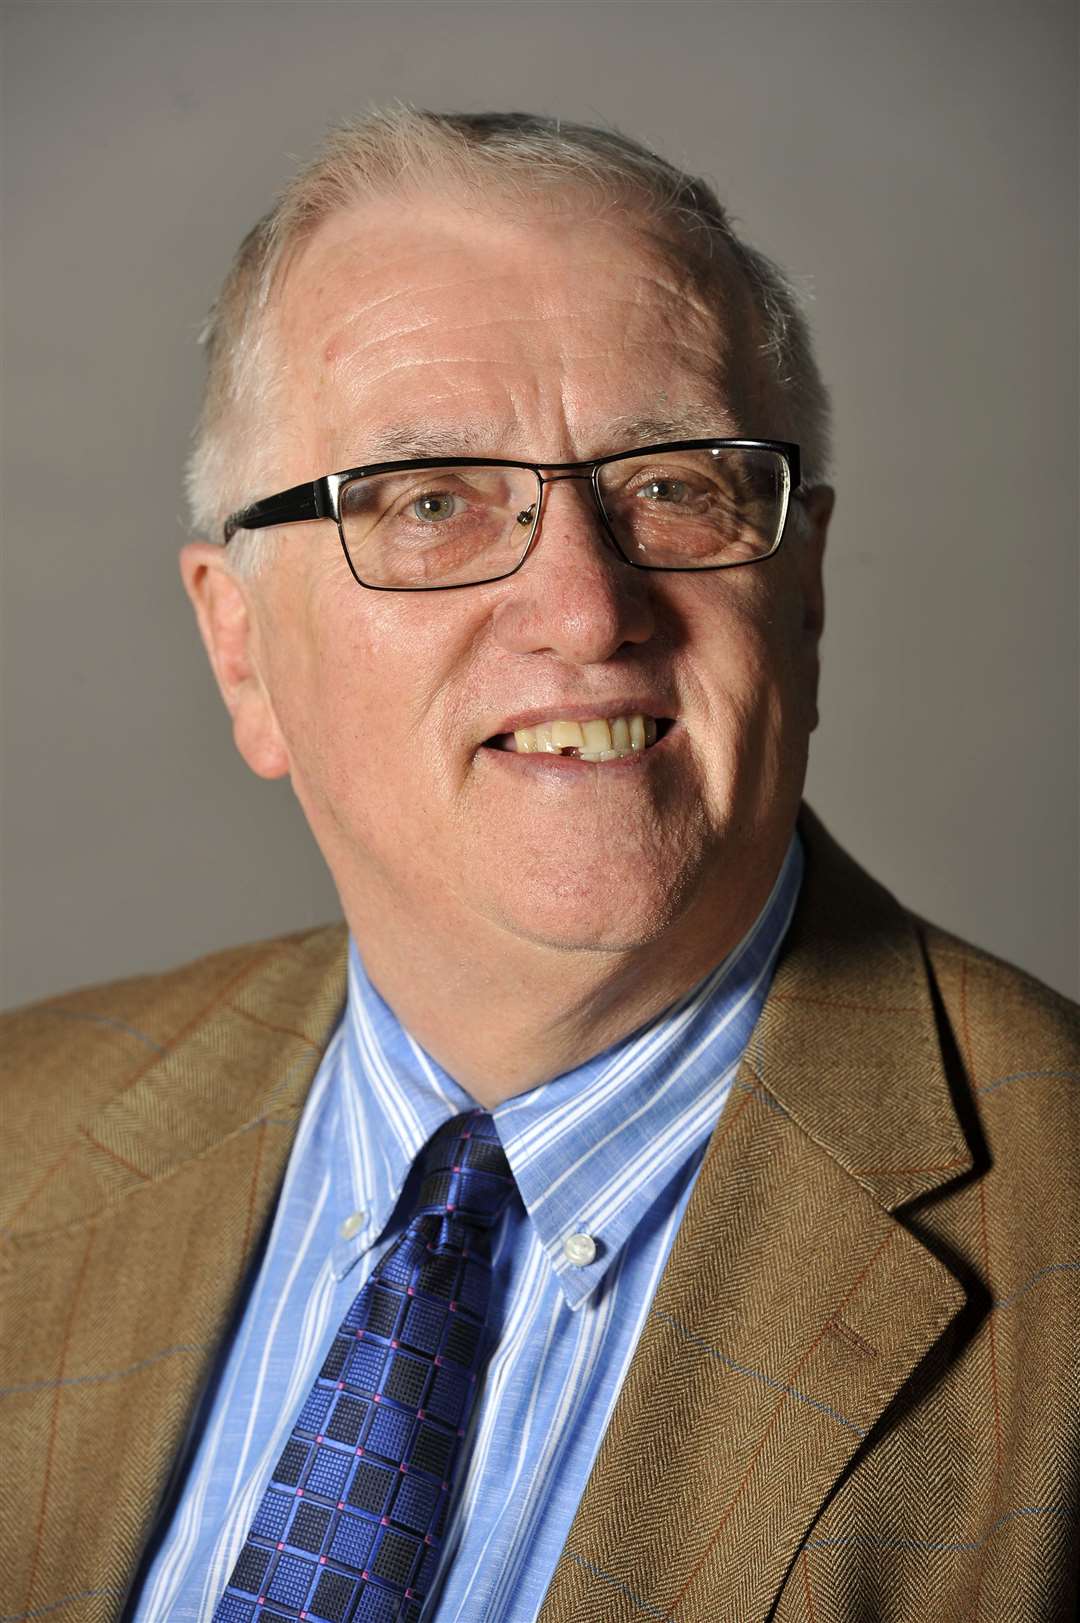 Cllr Howard Doe, Medway Council’s deputy leader and portfolio holder for housing and community services